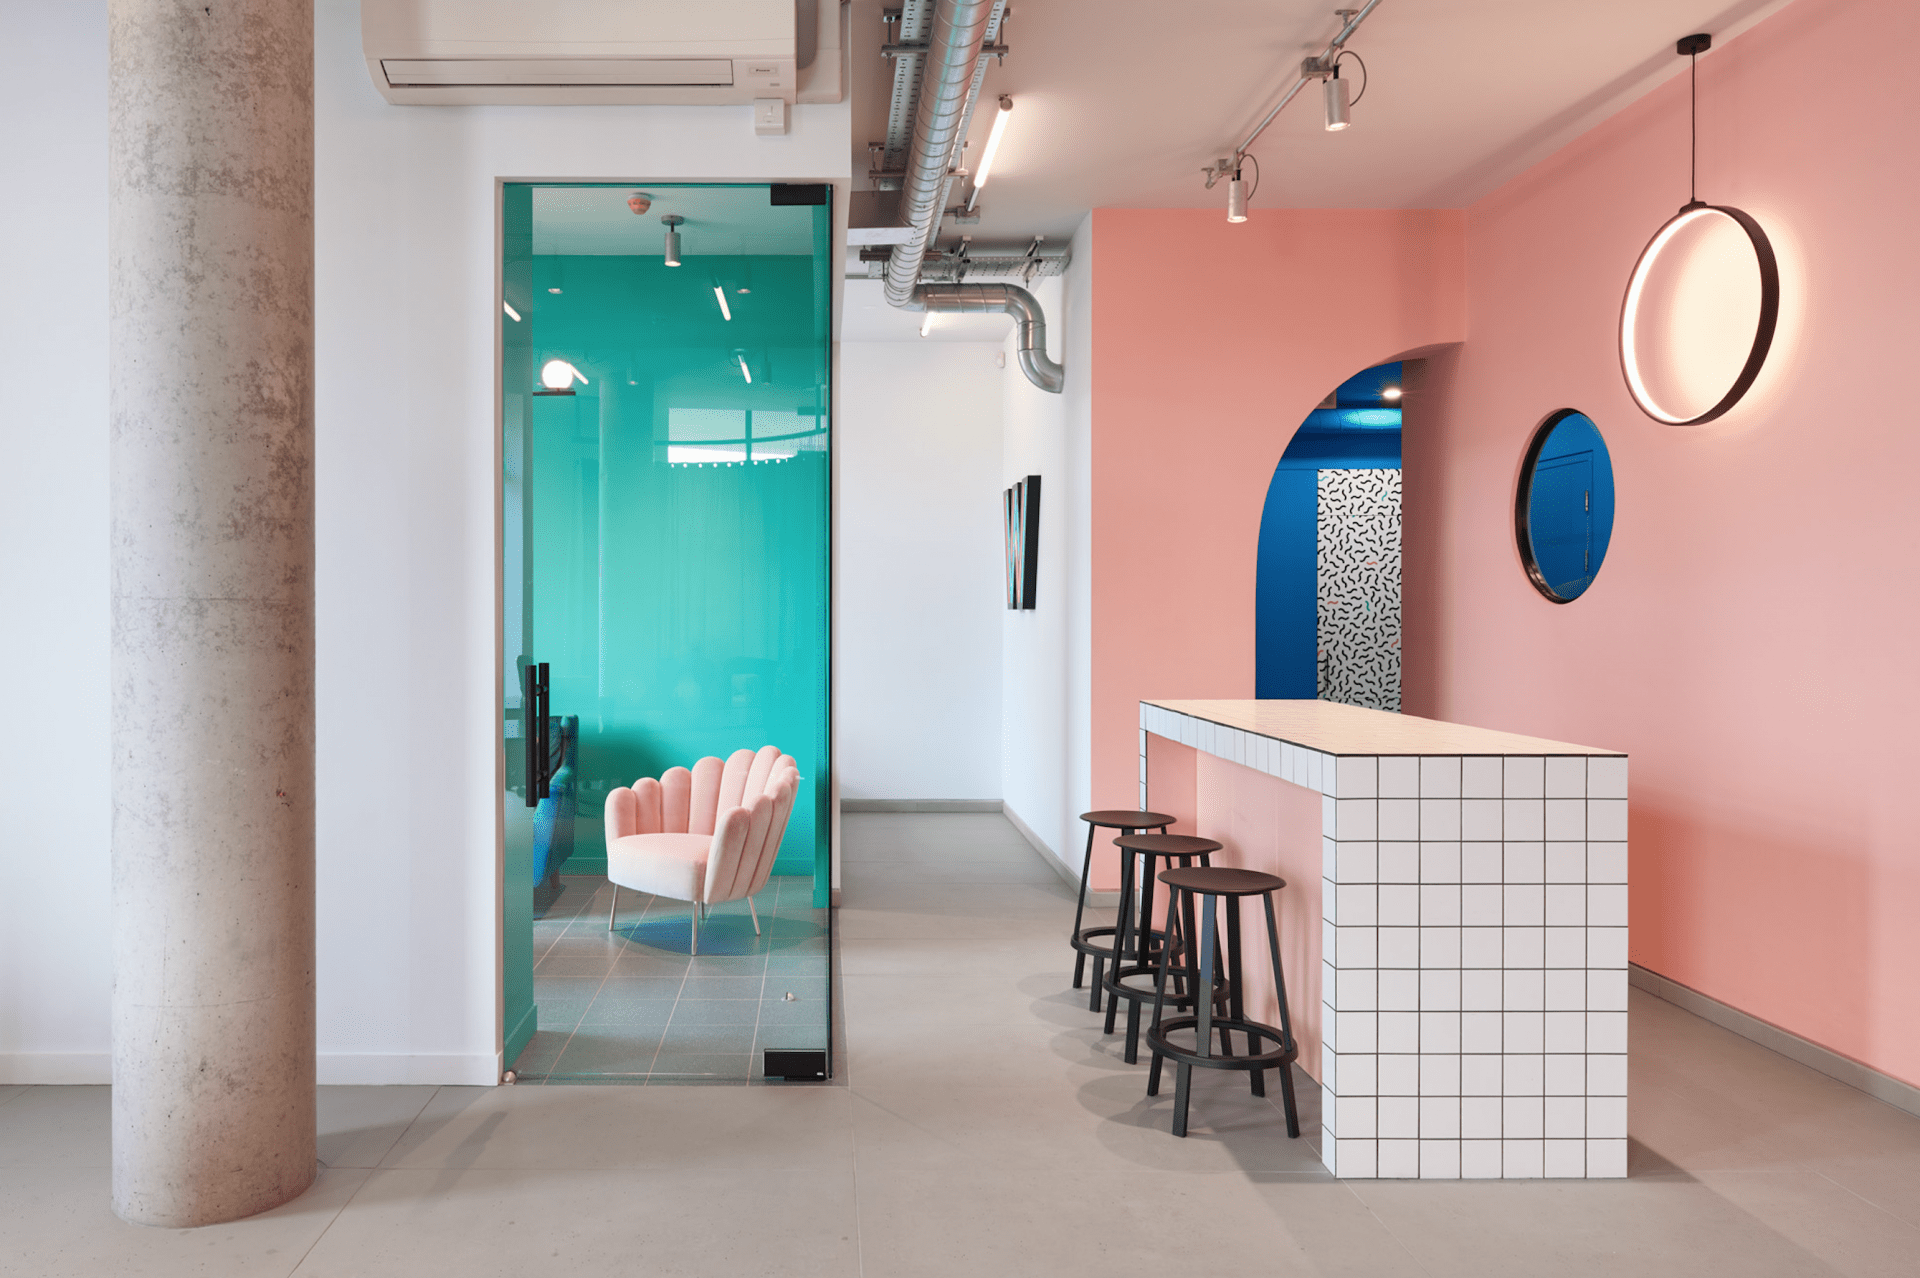 Interesting Projects creates a colourful office space full of contrasts for creative agency in Bristol